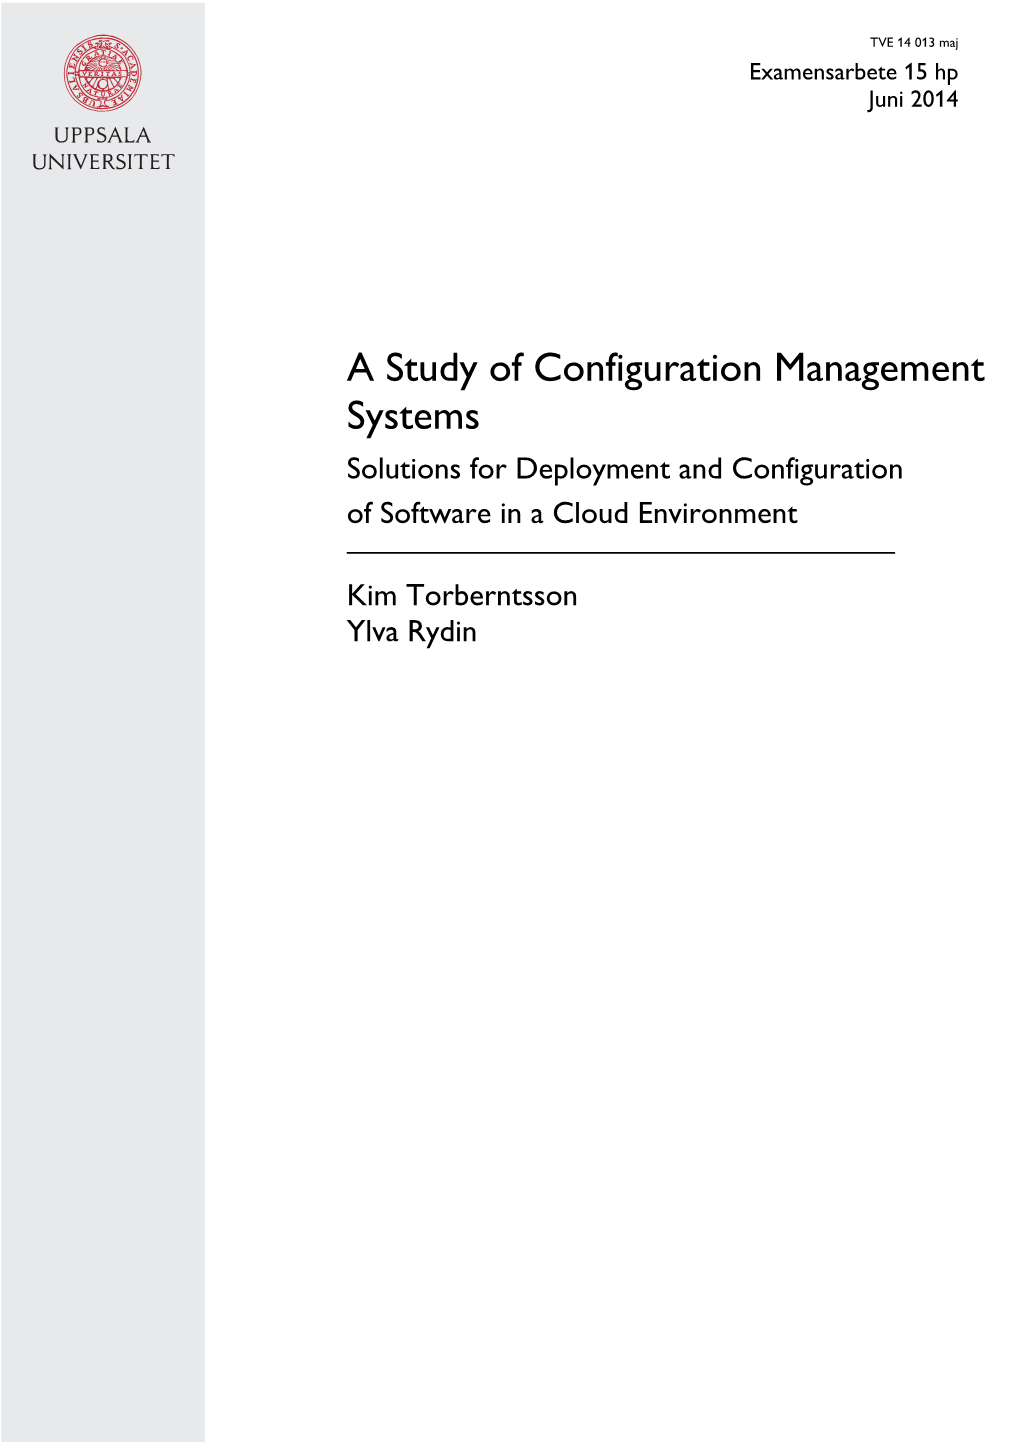 A Study of Configuration Management Systems Solutions for Deployment and Configuration of Software in a Cloud Environment